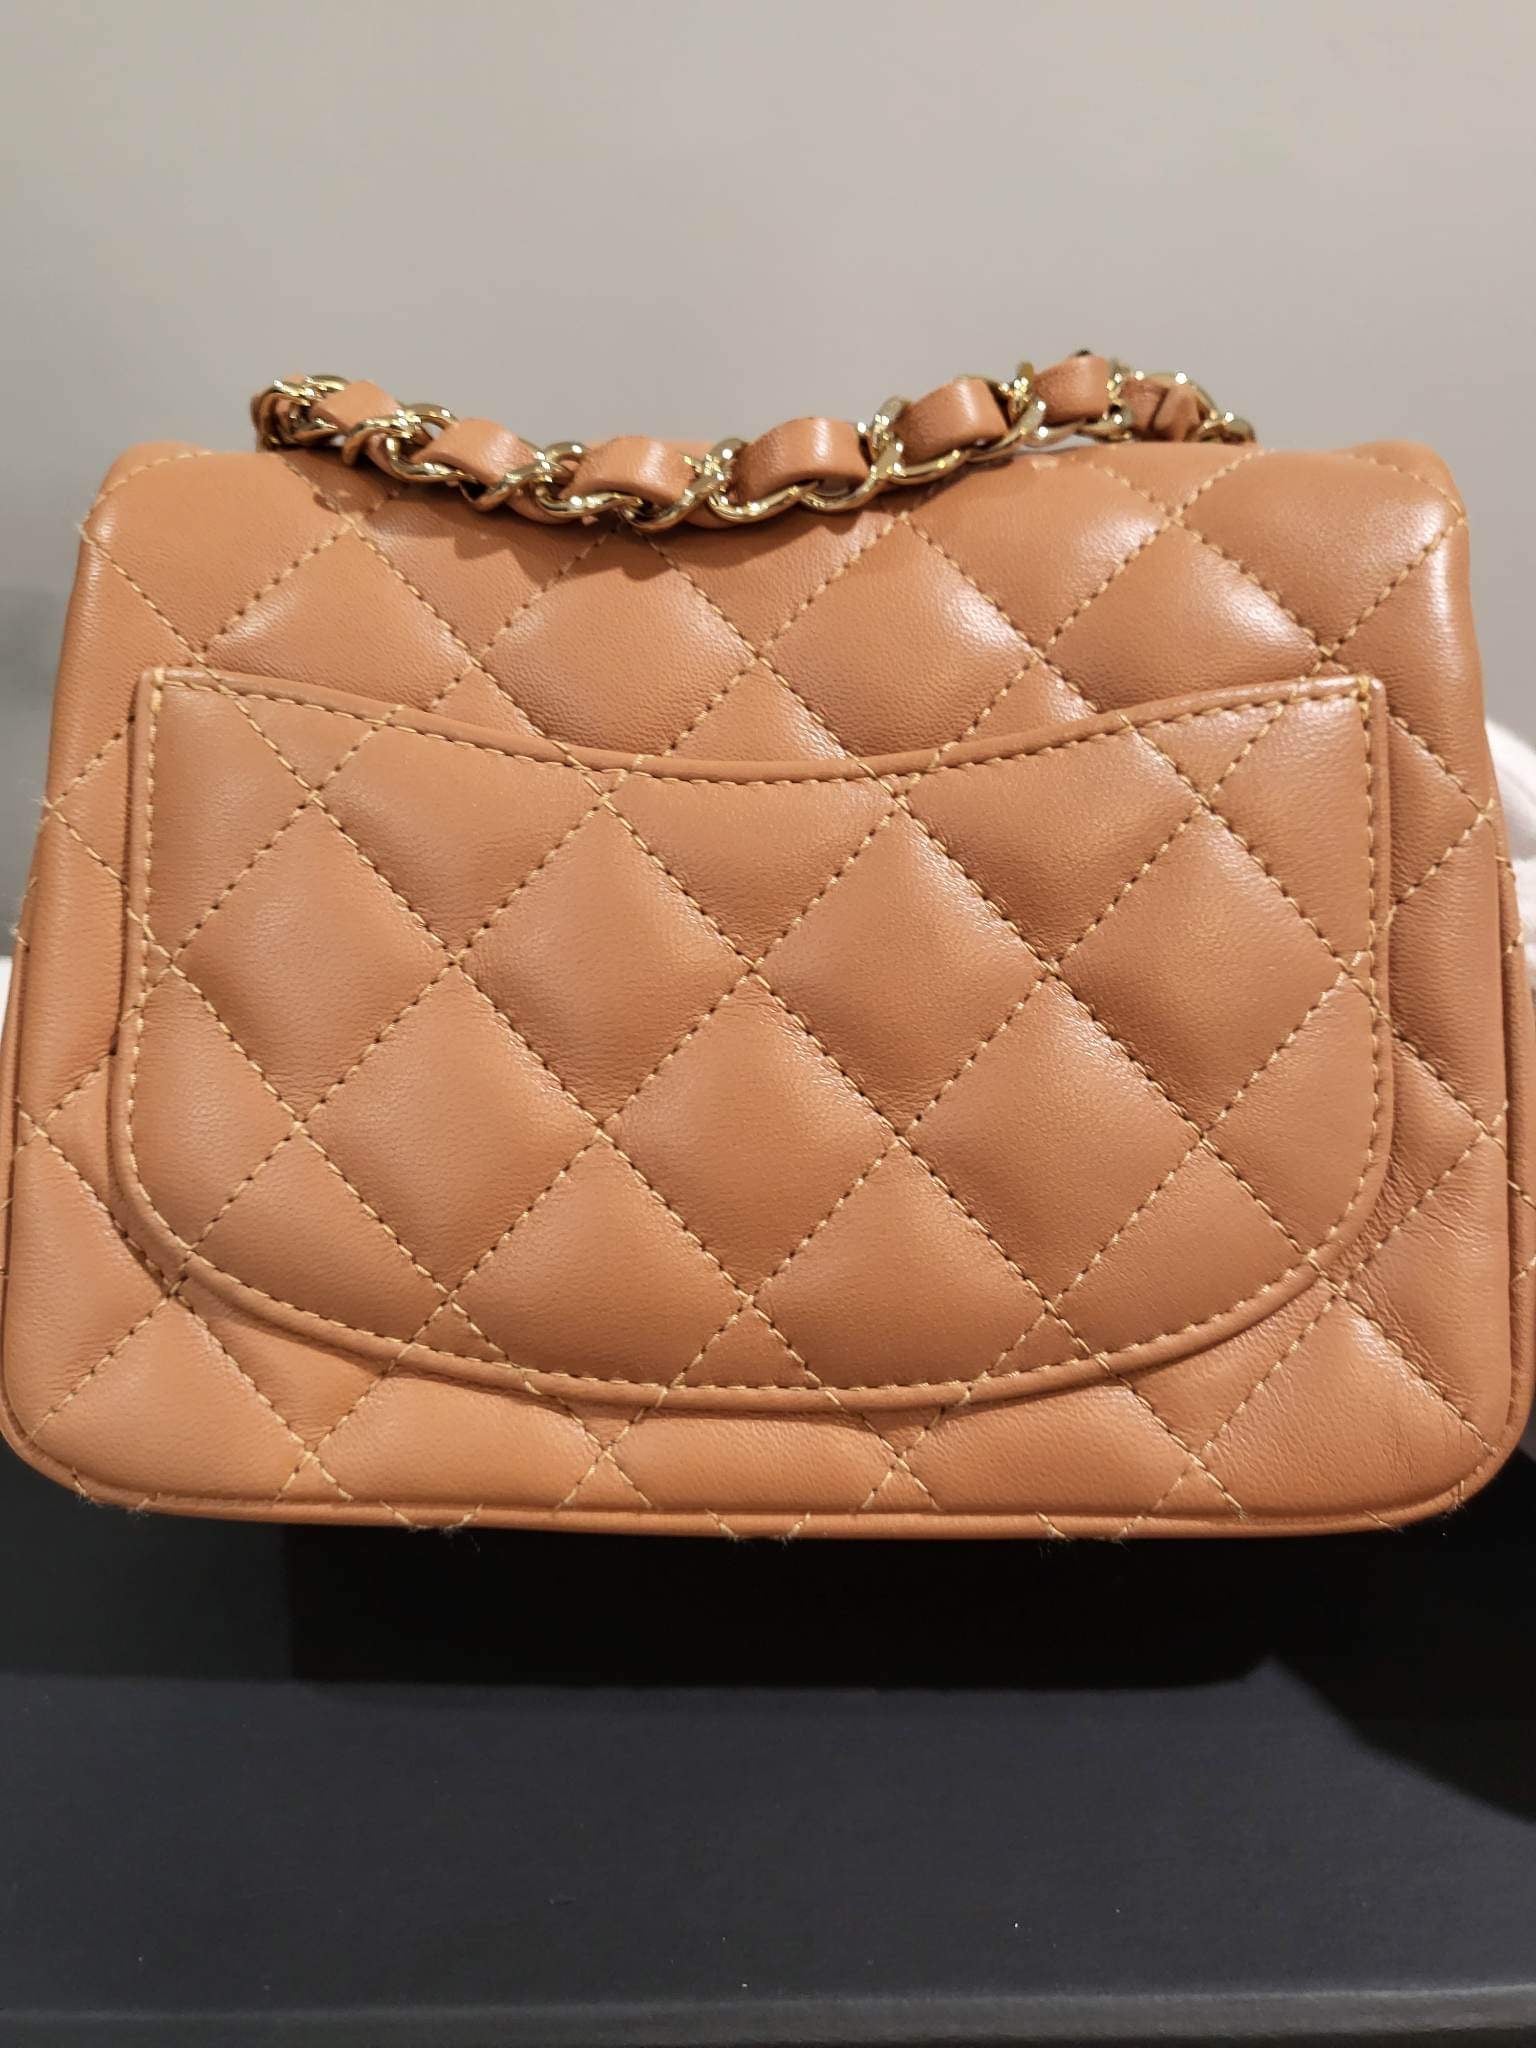 Chanel Caramel Quilted Caviar Leather Maxi Classic Double Flap Bag Chanel